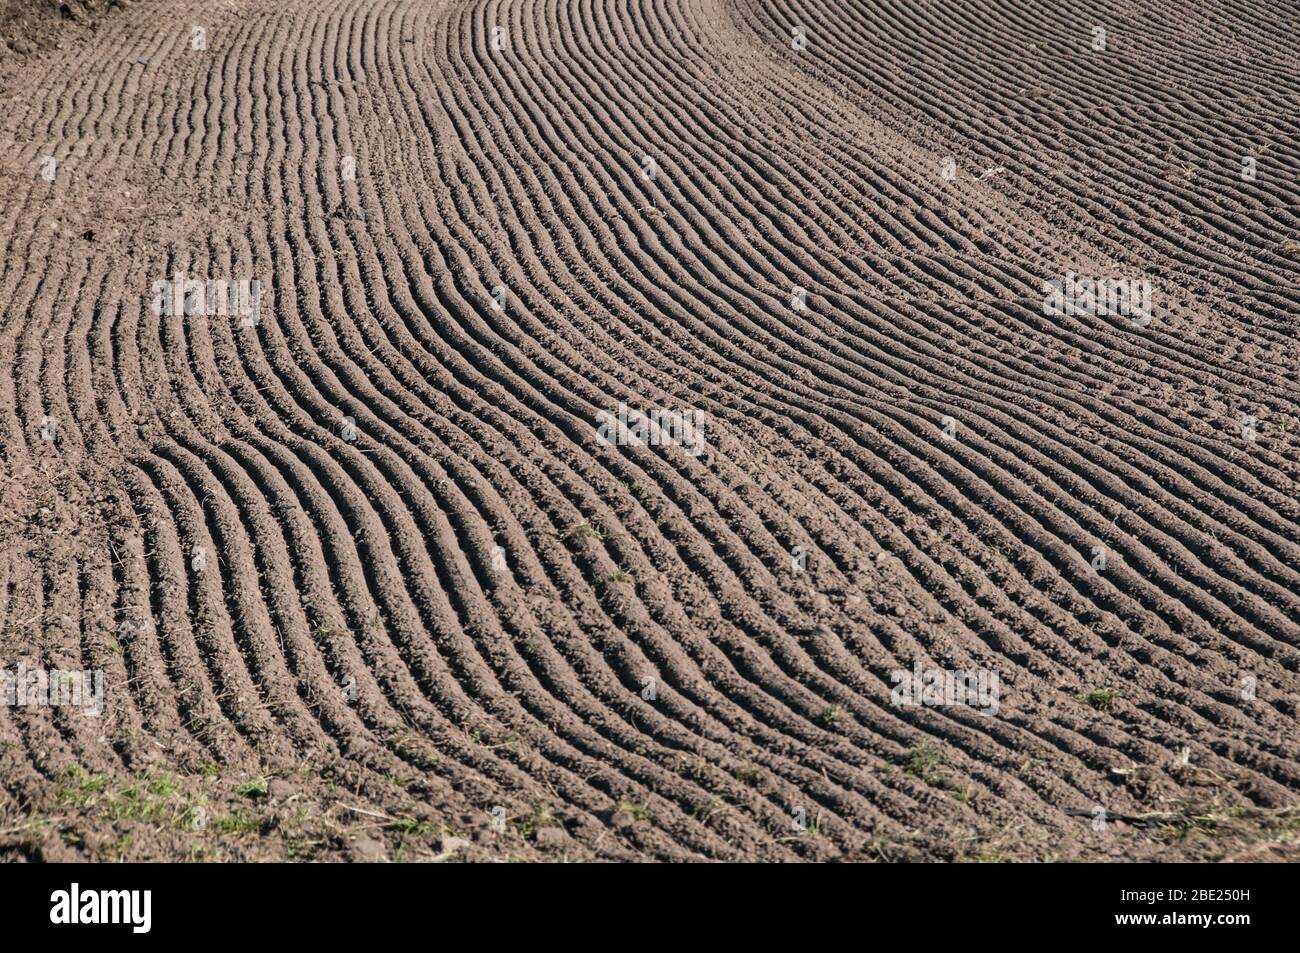 Around the UK - abstract view of a farmer's field where crops have just been sown Stock Photo